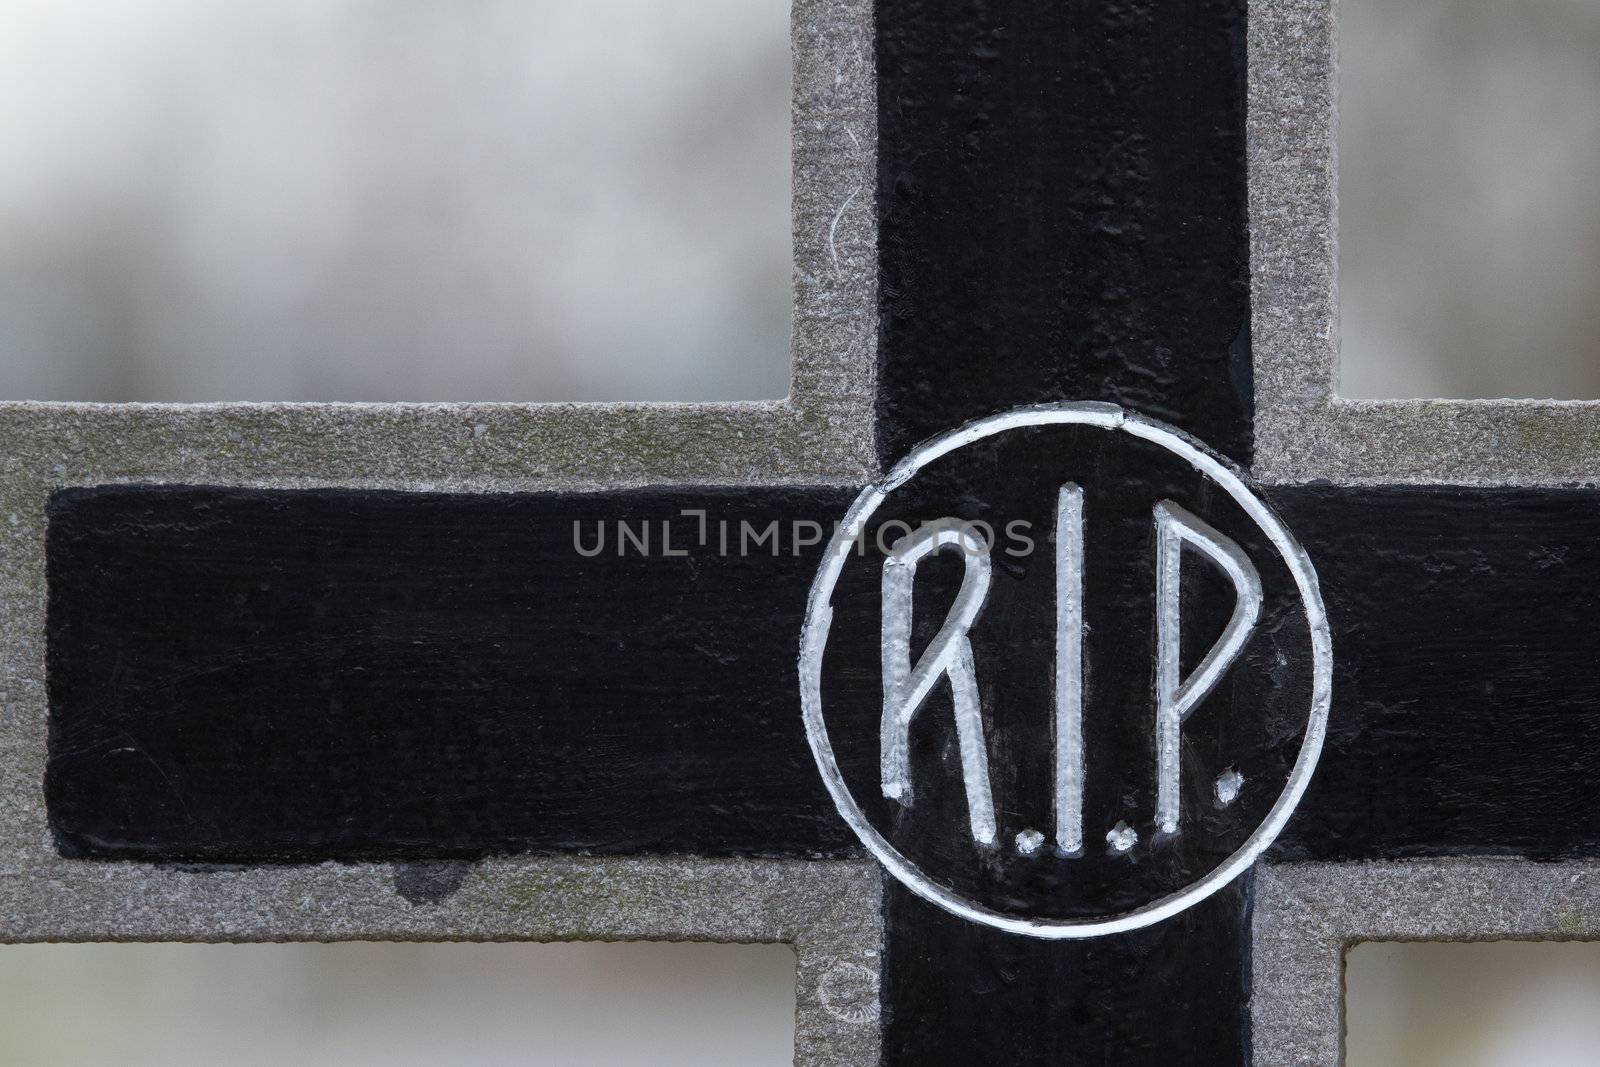 The letter RIP on an old marble grave in Holland